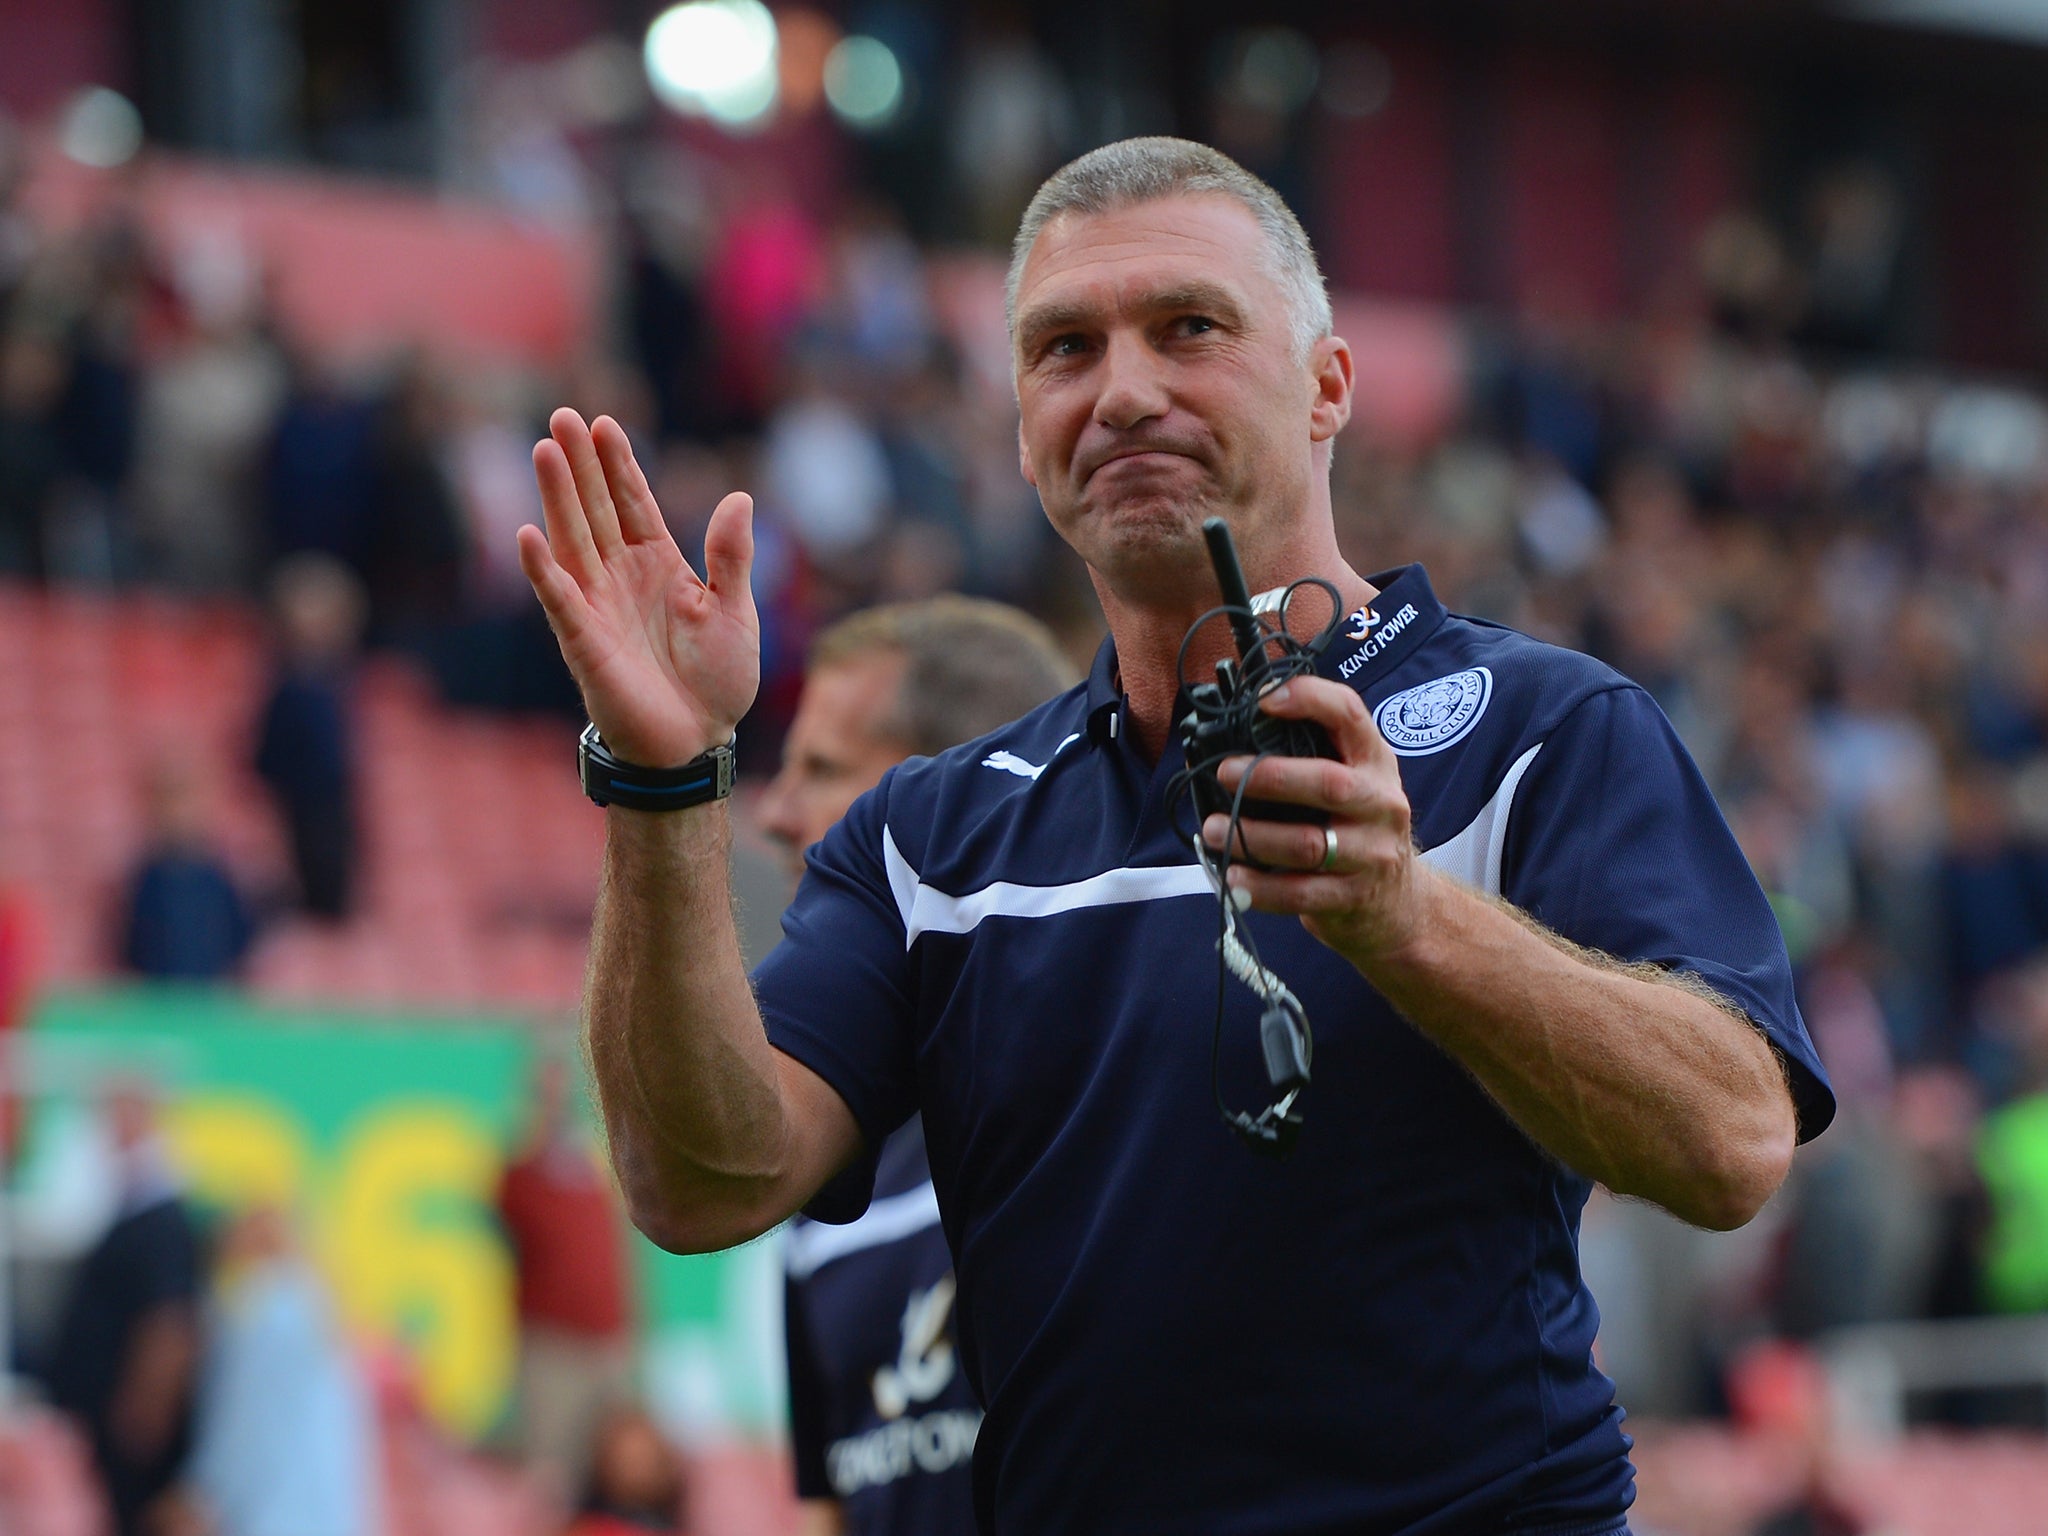 Nigel Pearson came to blows with a Crystal Palace player during Leicester's 1-0 defeat at the weekend